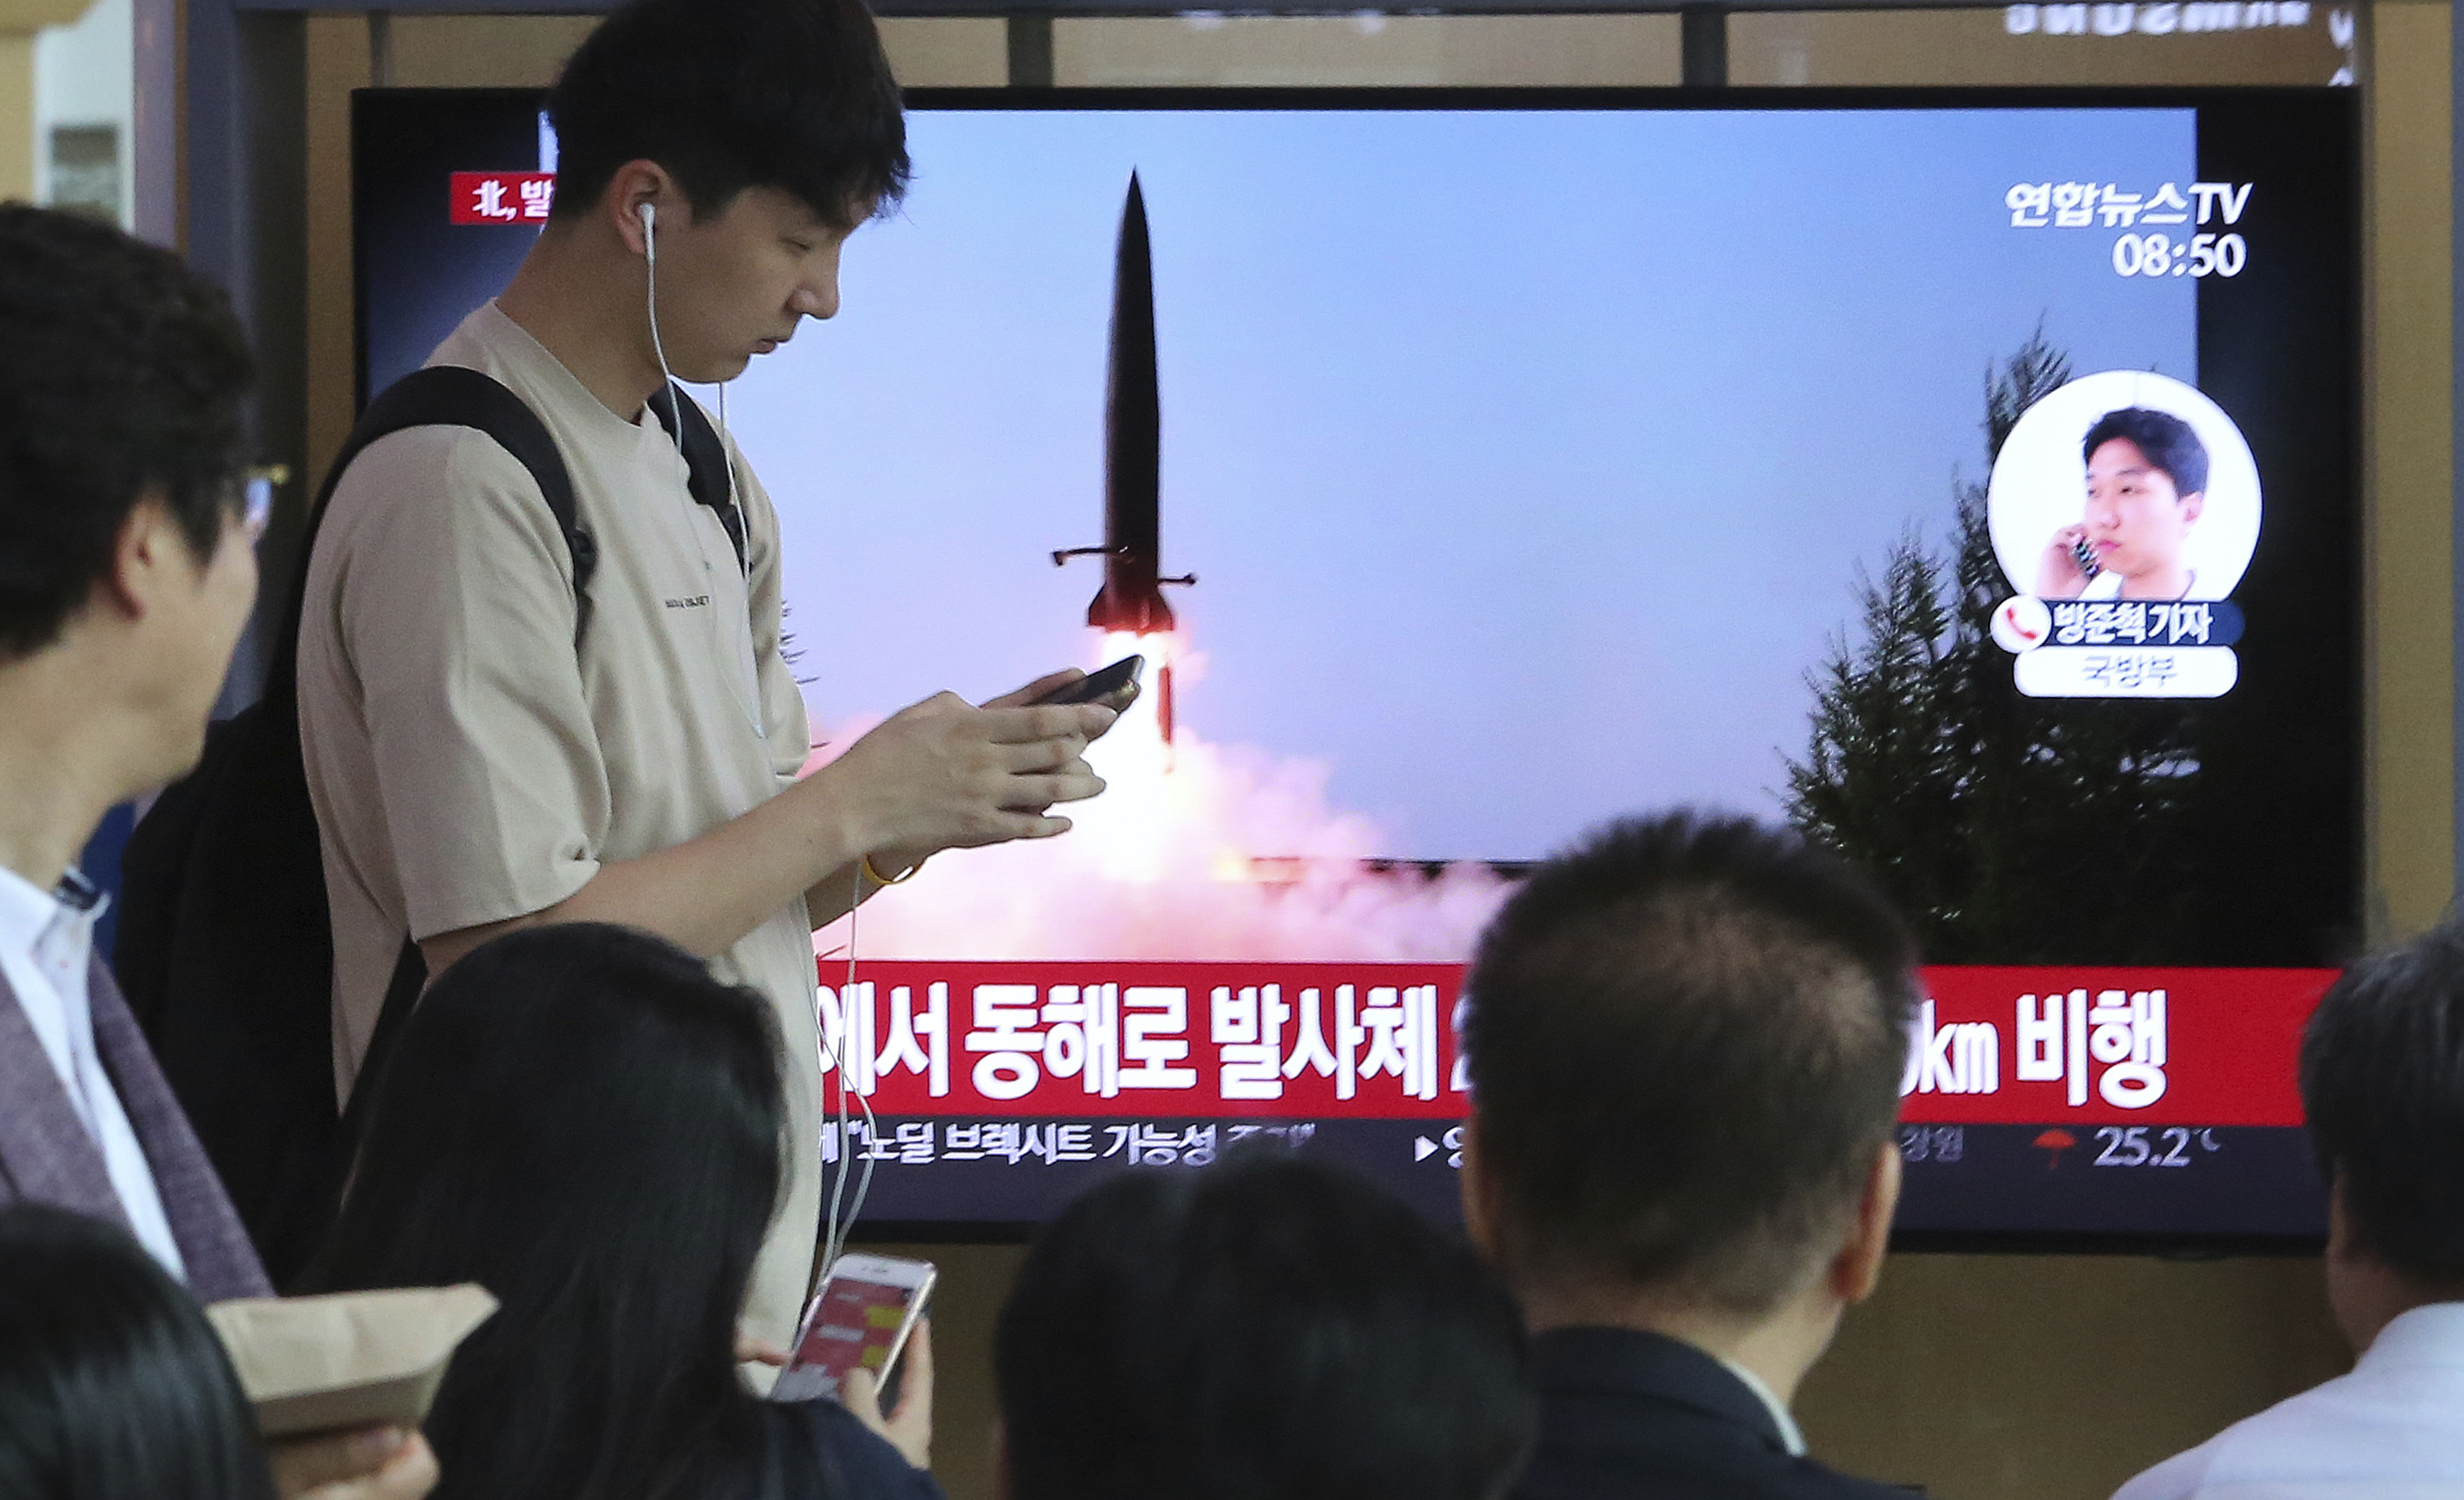 People watch a TV showing a file image of North Korea's missile launch during a news program at the Seoul Railway Station in Seoul, South Korea, Thursday, July 25, 2019. North Korea fired two unidentified projectiles into the sea on Thursday, South Korea's military said, the first launches in more than two months as North Korean and U.S. officials work to restart nuclear diplomacy. The signs read: 